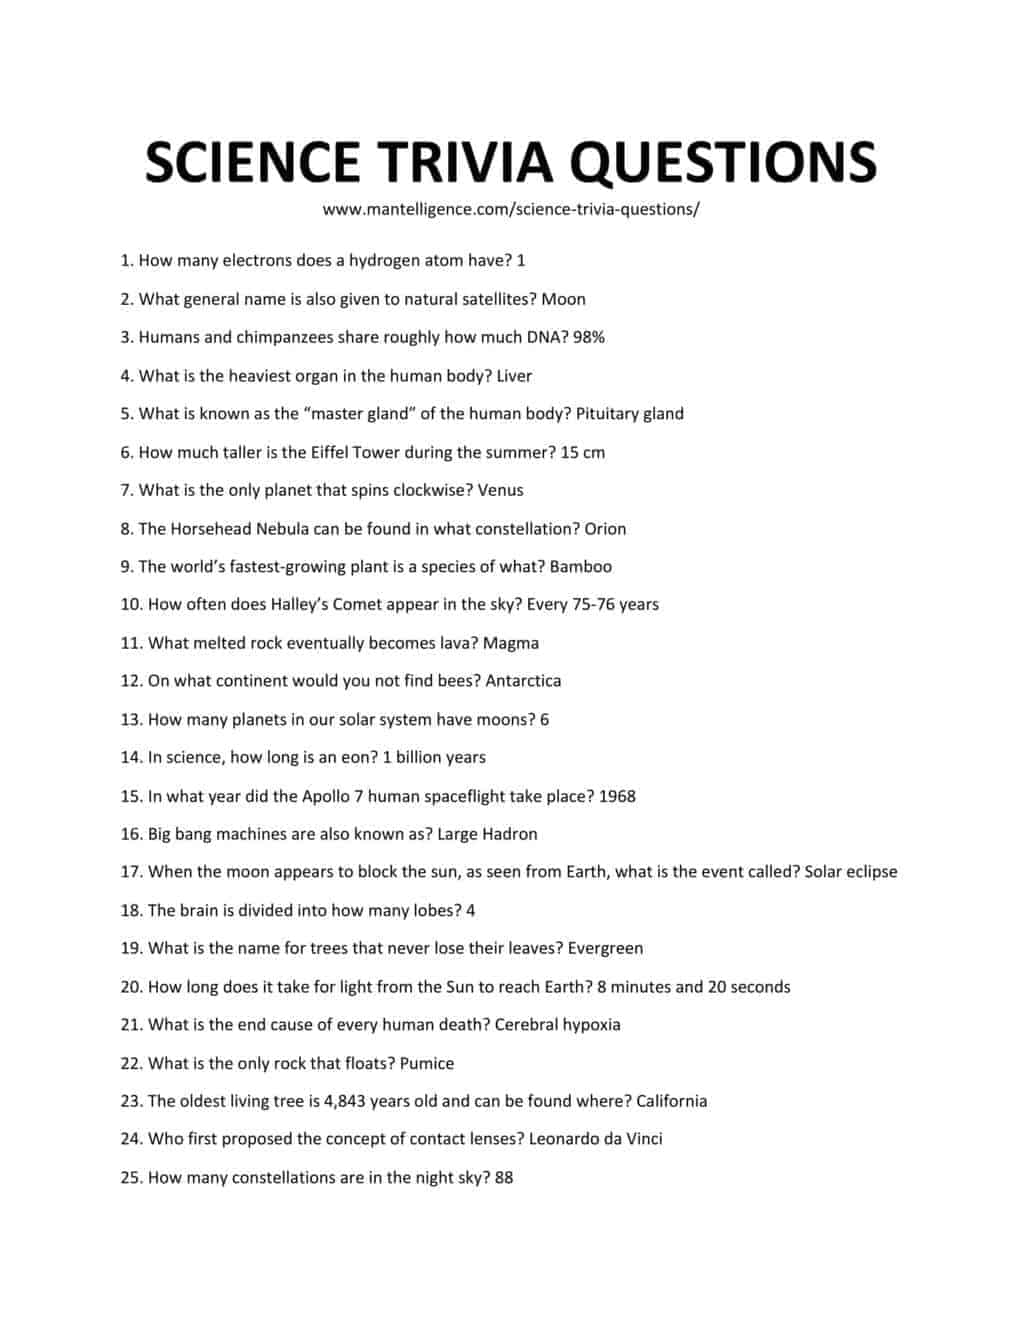 Downloadable List of Science Trivia Questions